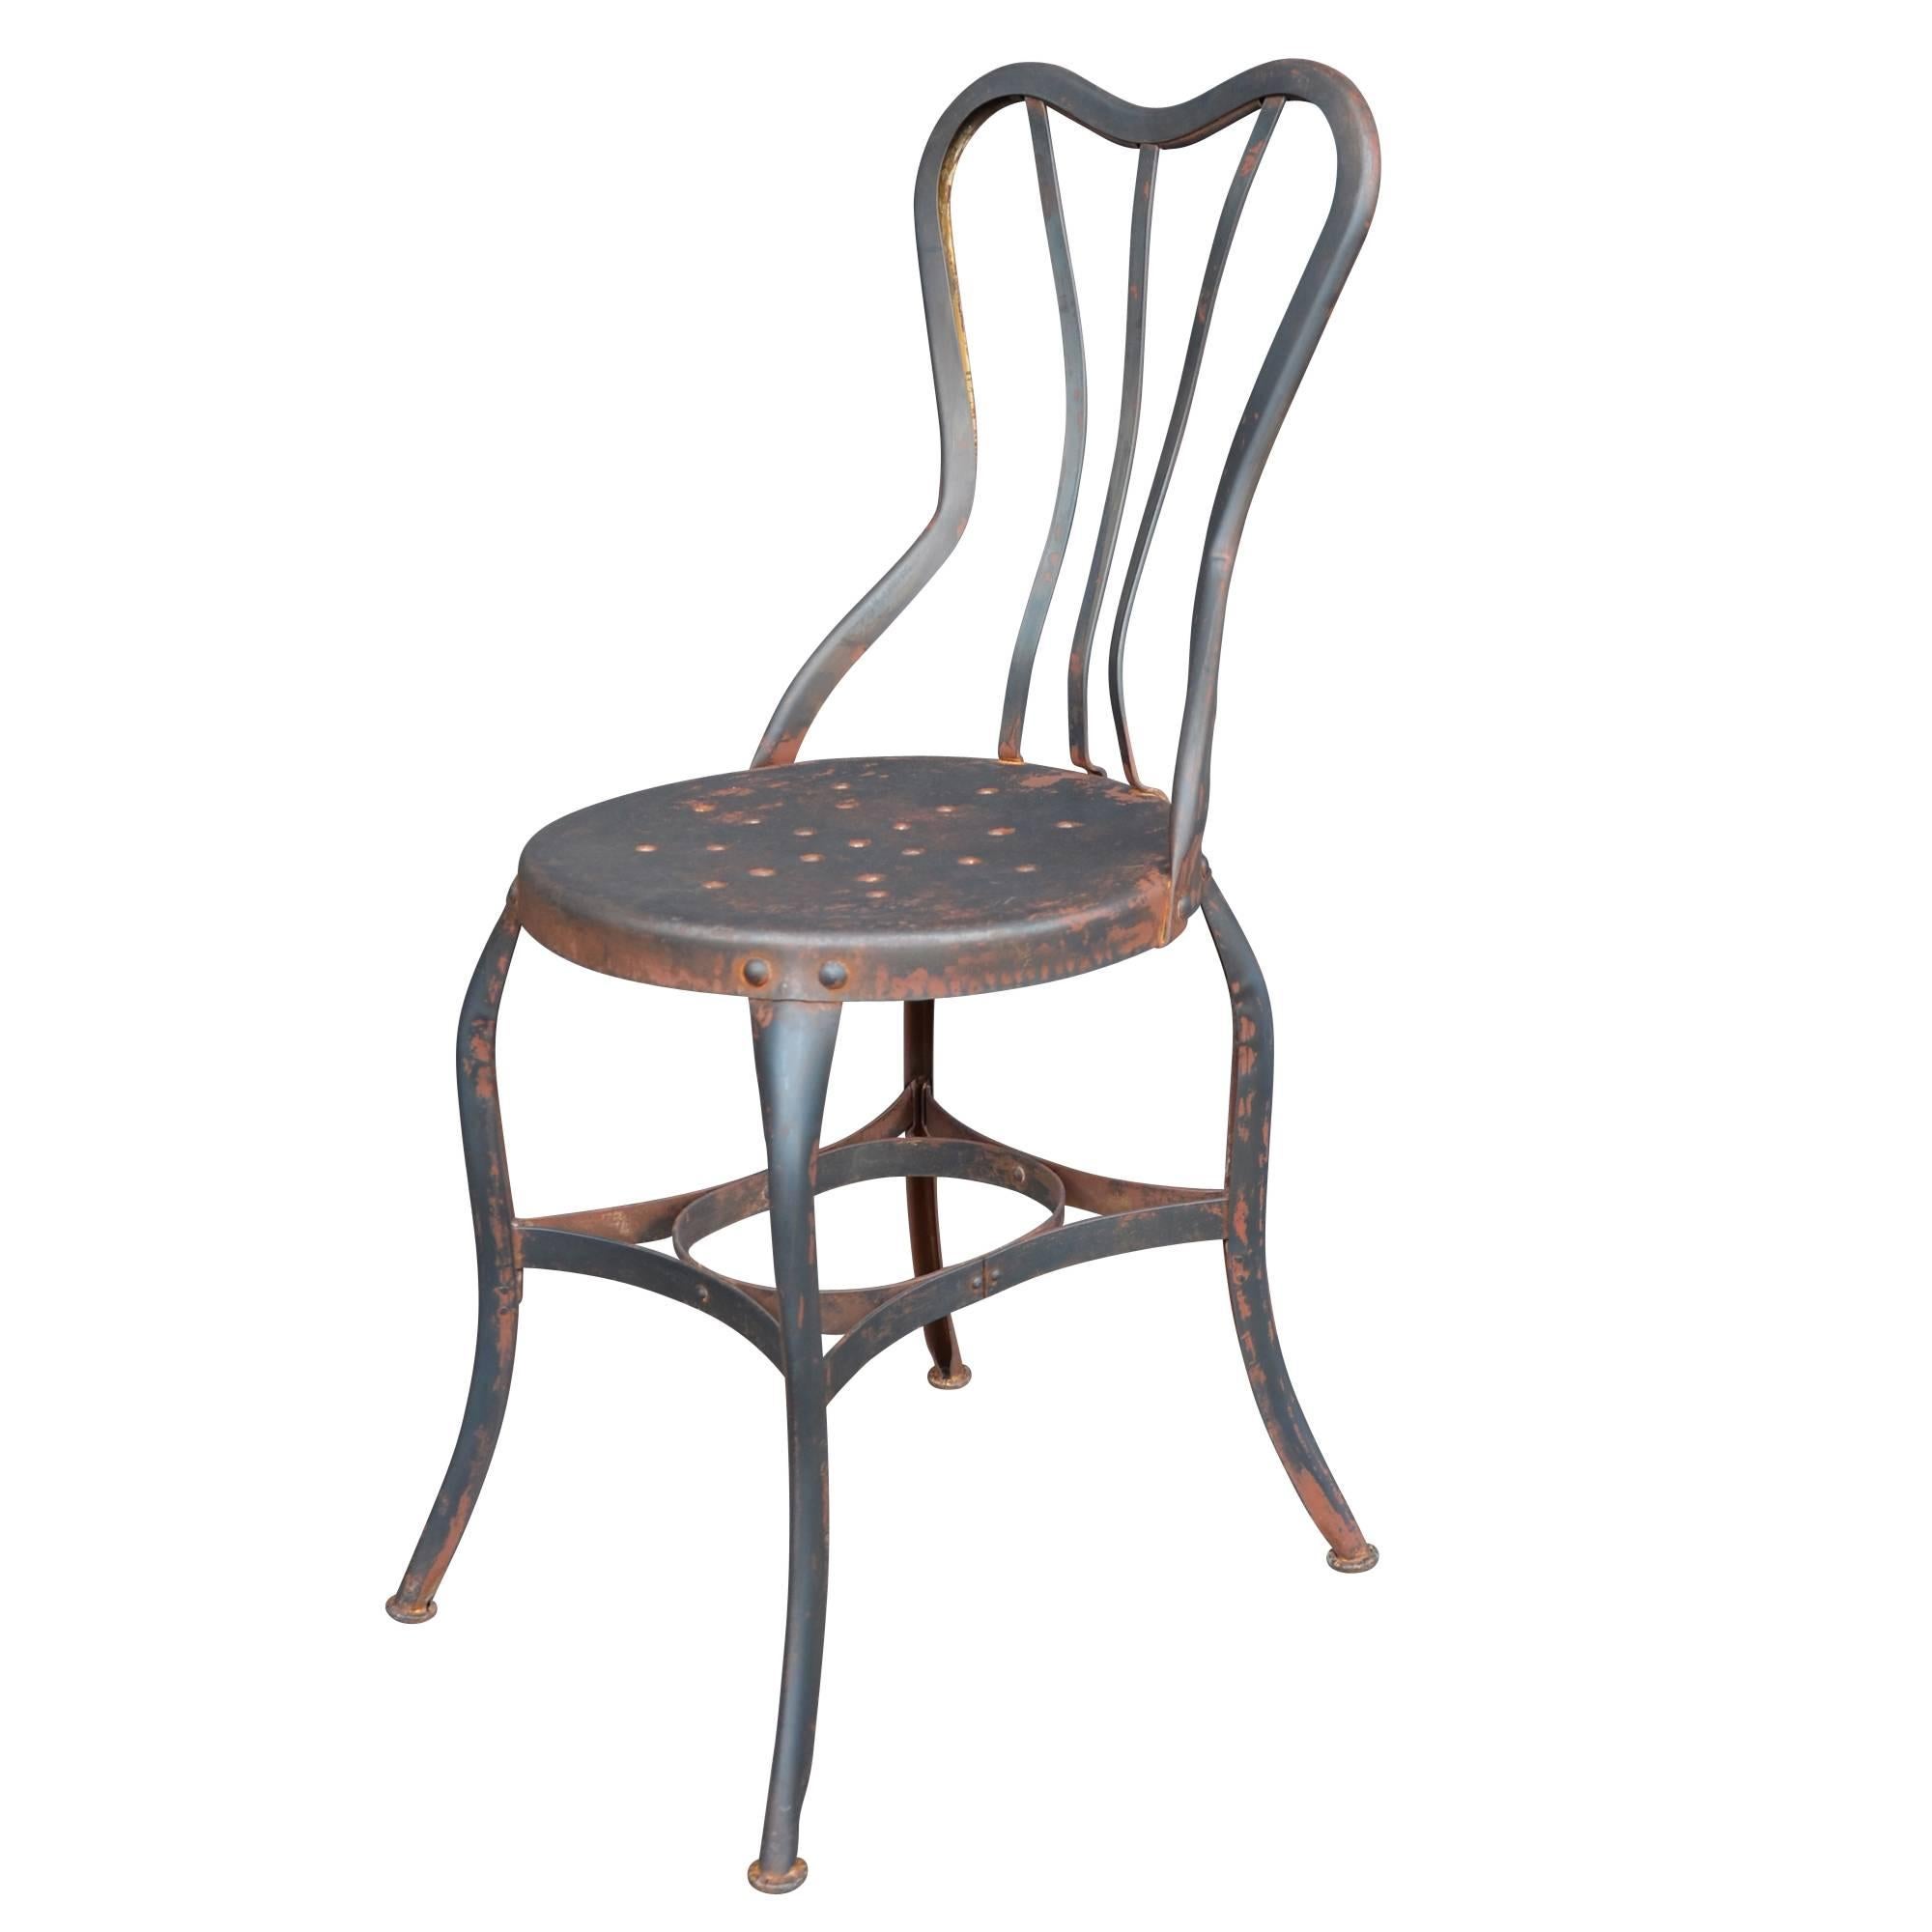 We are in love. This set of Toledo cafe chairs bring absolutely everything to the table: the historic importance of the Toledo-based Uhl Art Metal Furniture Company, an incredible raw steel finish, which is perfectly worn from a lifetime in the